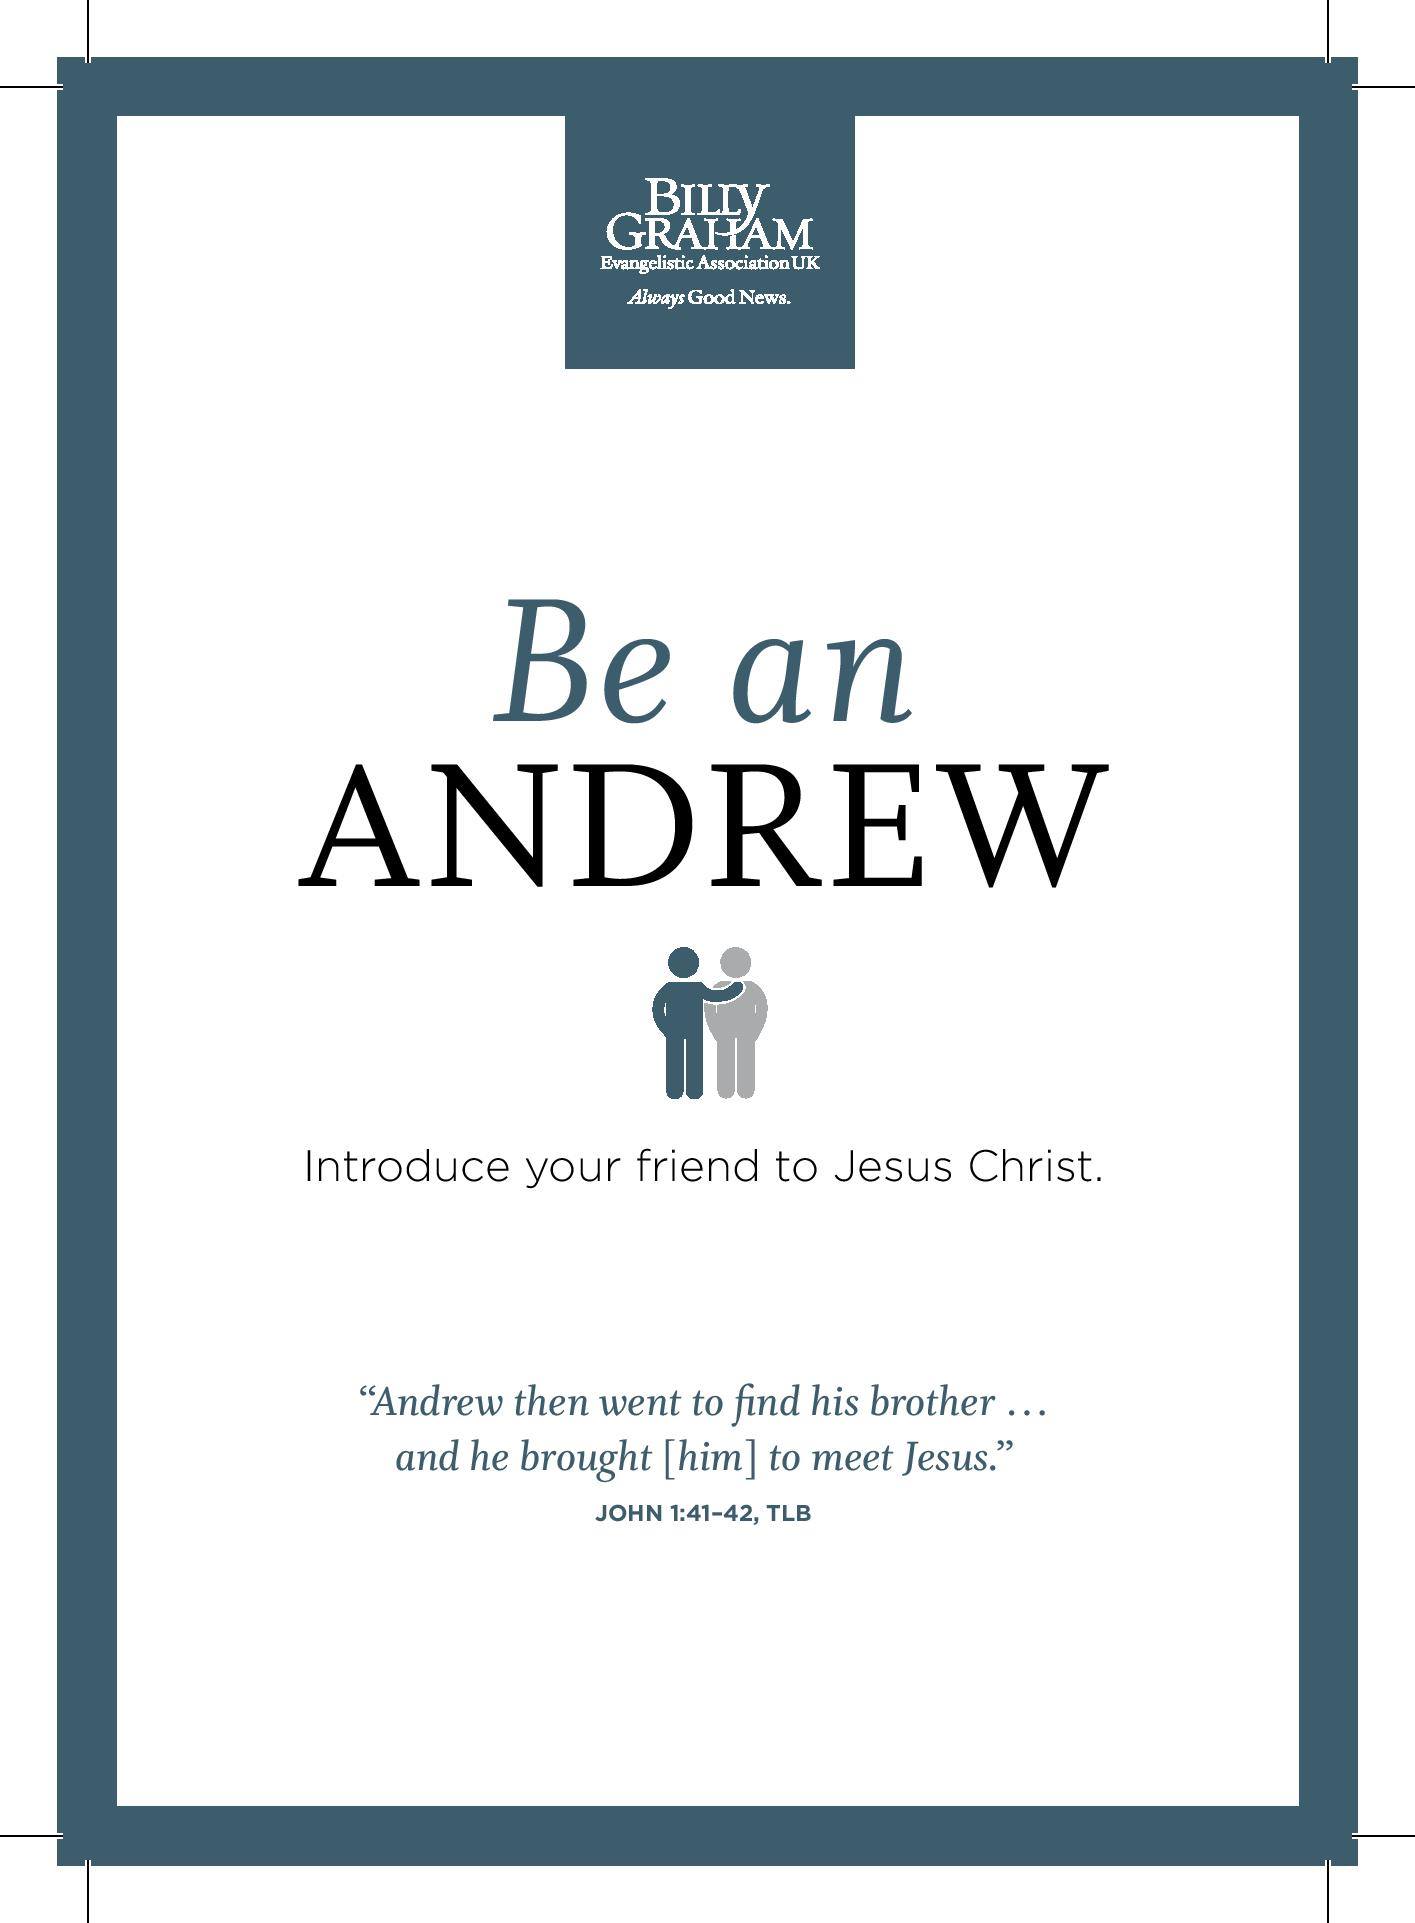 Blackpool Festival of Hope with Franklin Graham:  Be an Andrew!